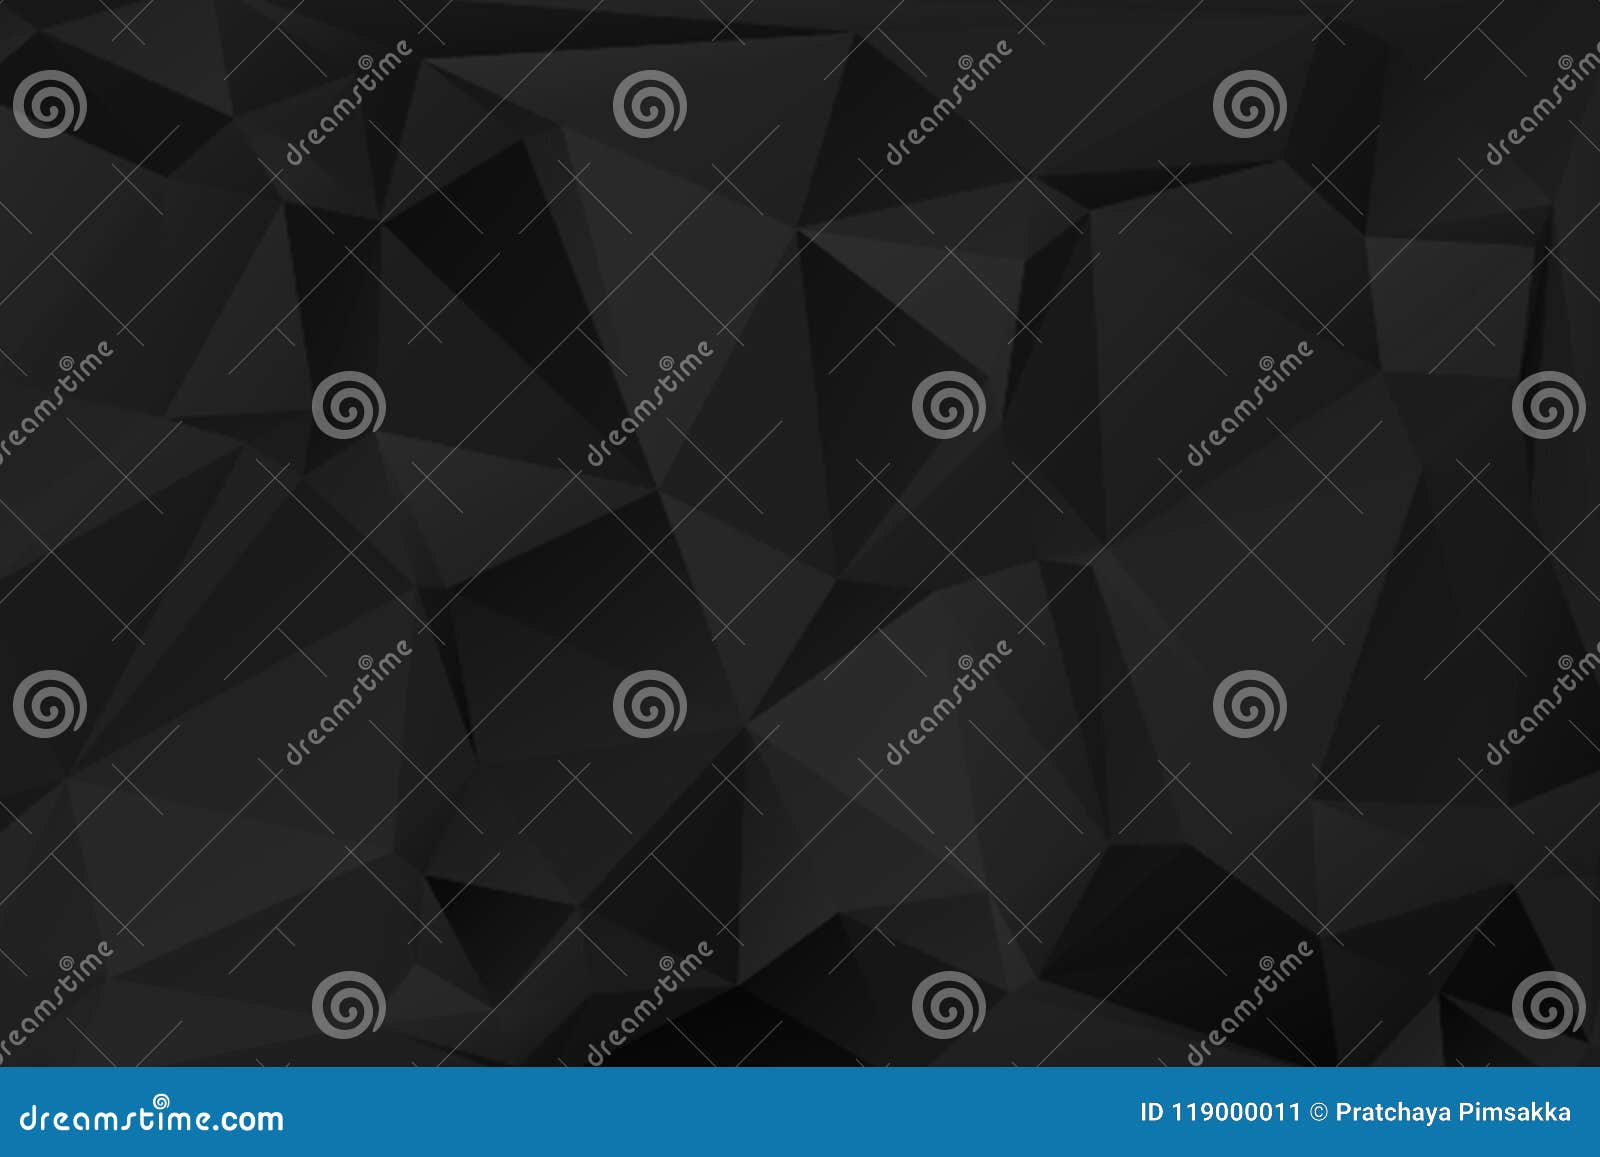 black abstract polygonal background